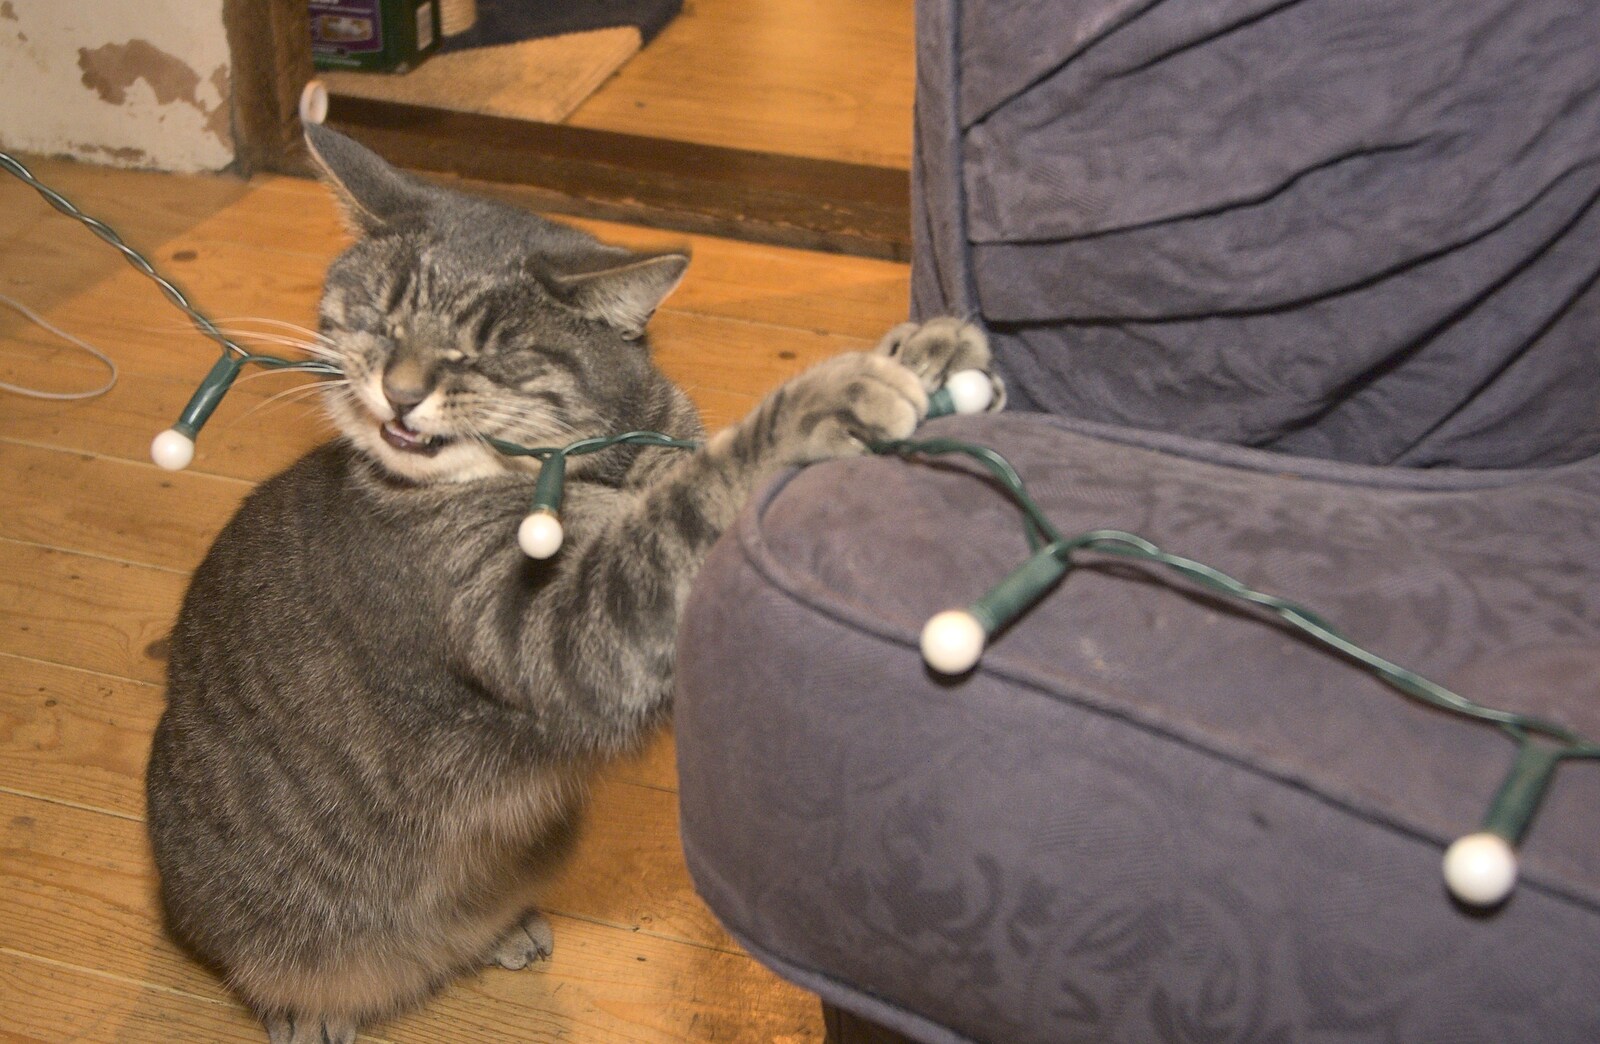 Boris - Stripey Cat - chews up the fairy lights from Ducks by the Mere, and Christmas Tree Decoration, Brome, Suffolk - 12th December 2010